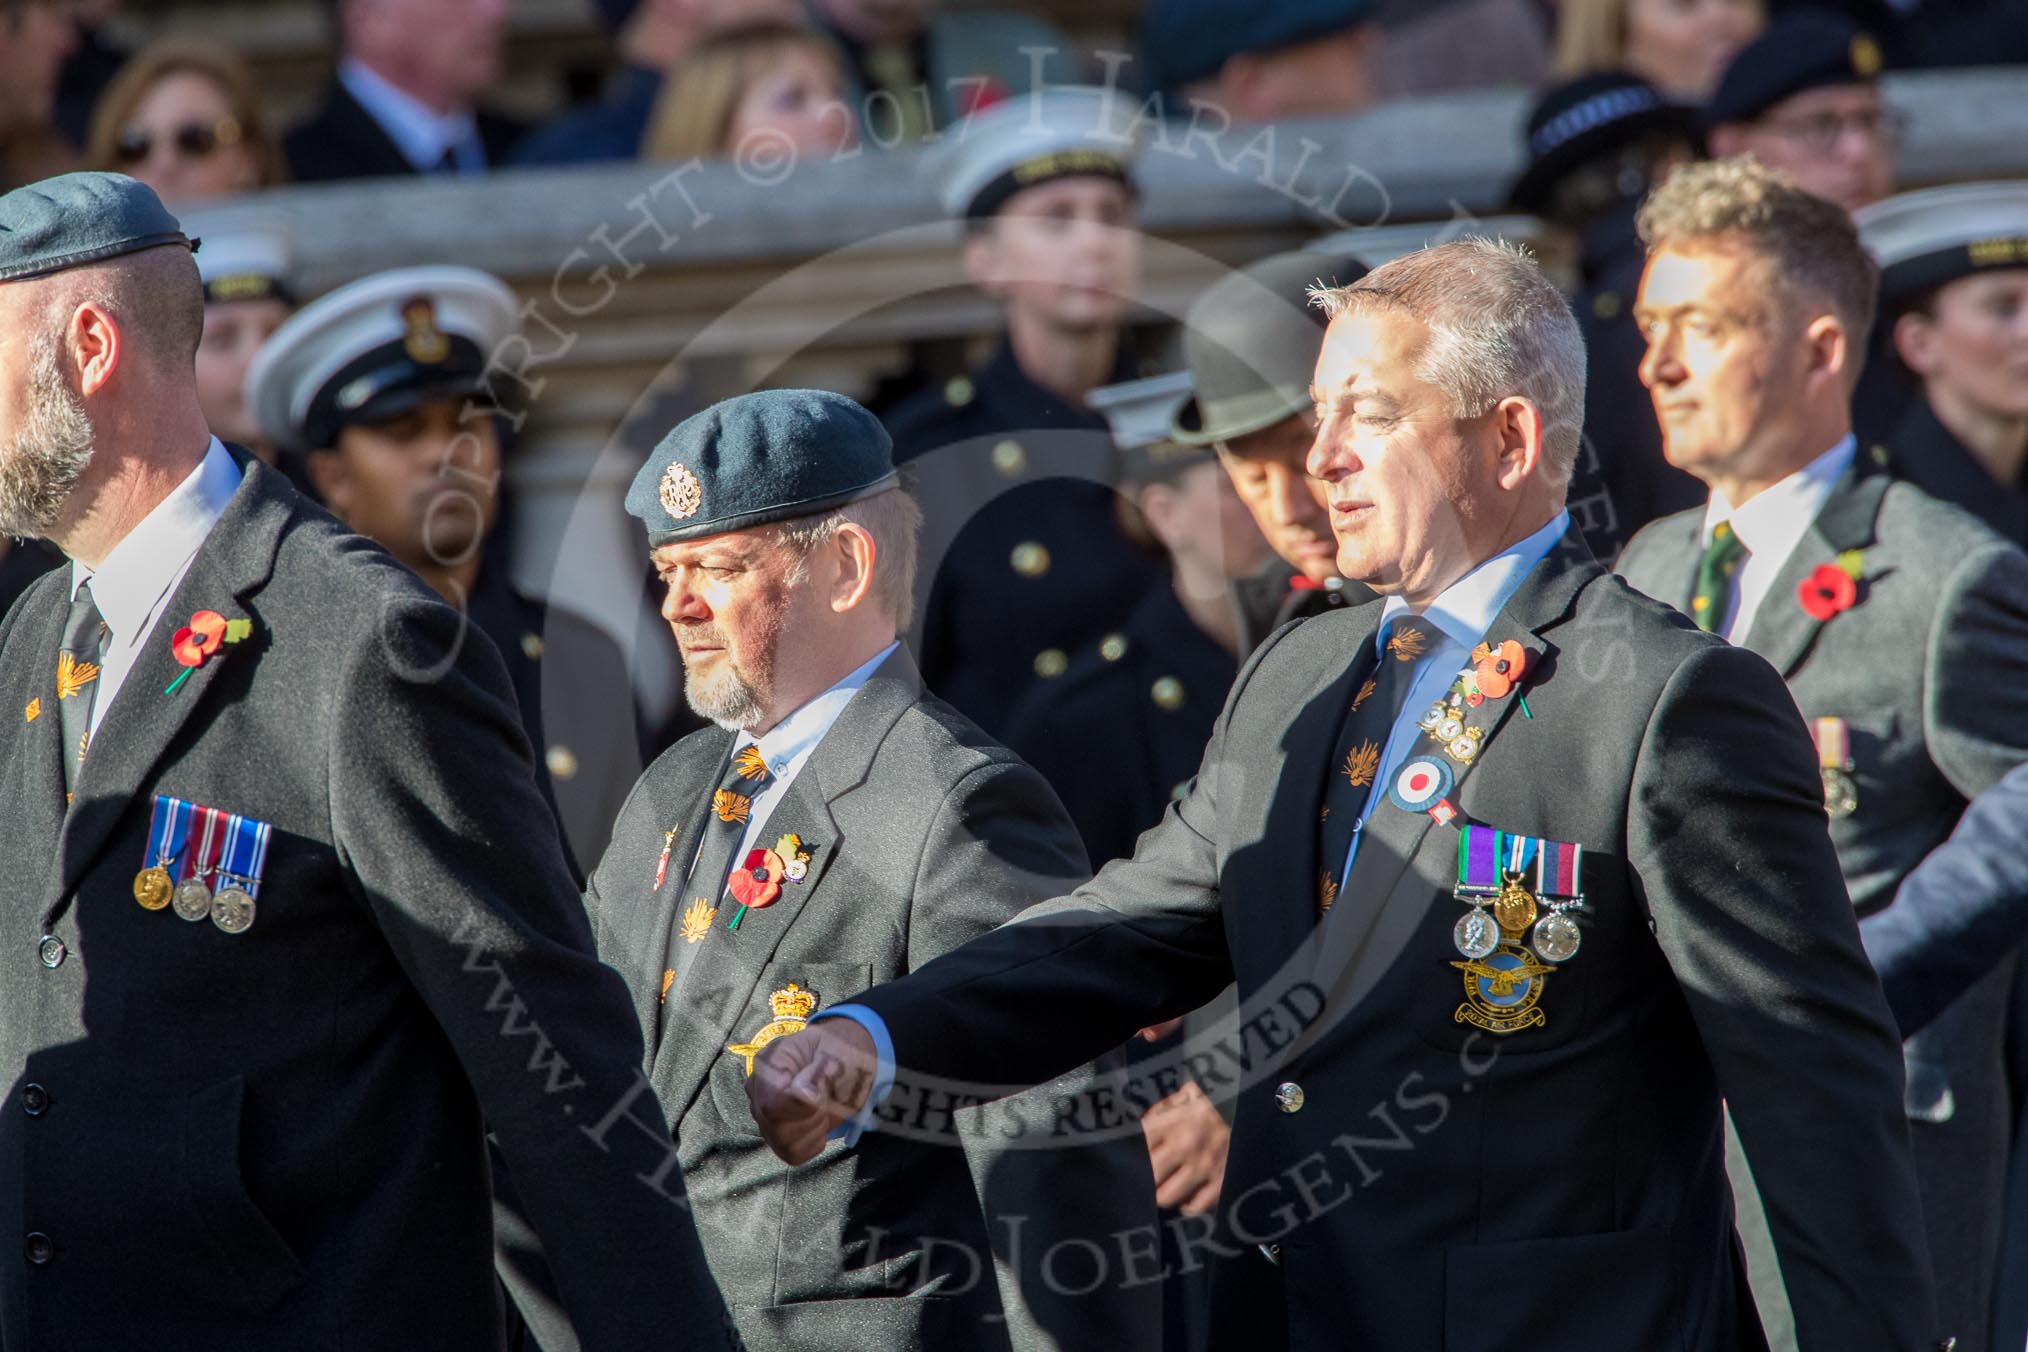 Royal Air Forces Association Armourers Branch (Group C26, 45 members) during the Royal British Legion March Past on Remembrance Sunday at the Cenotaph, Whitehall, Westminster, London, 11 November 2018, 12:18..